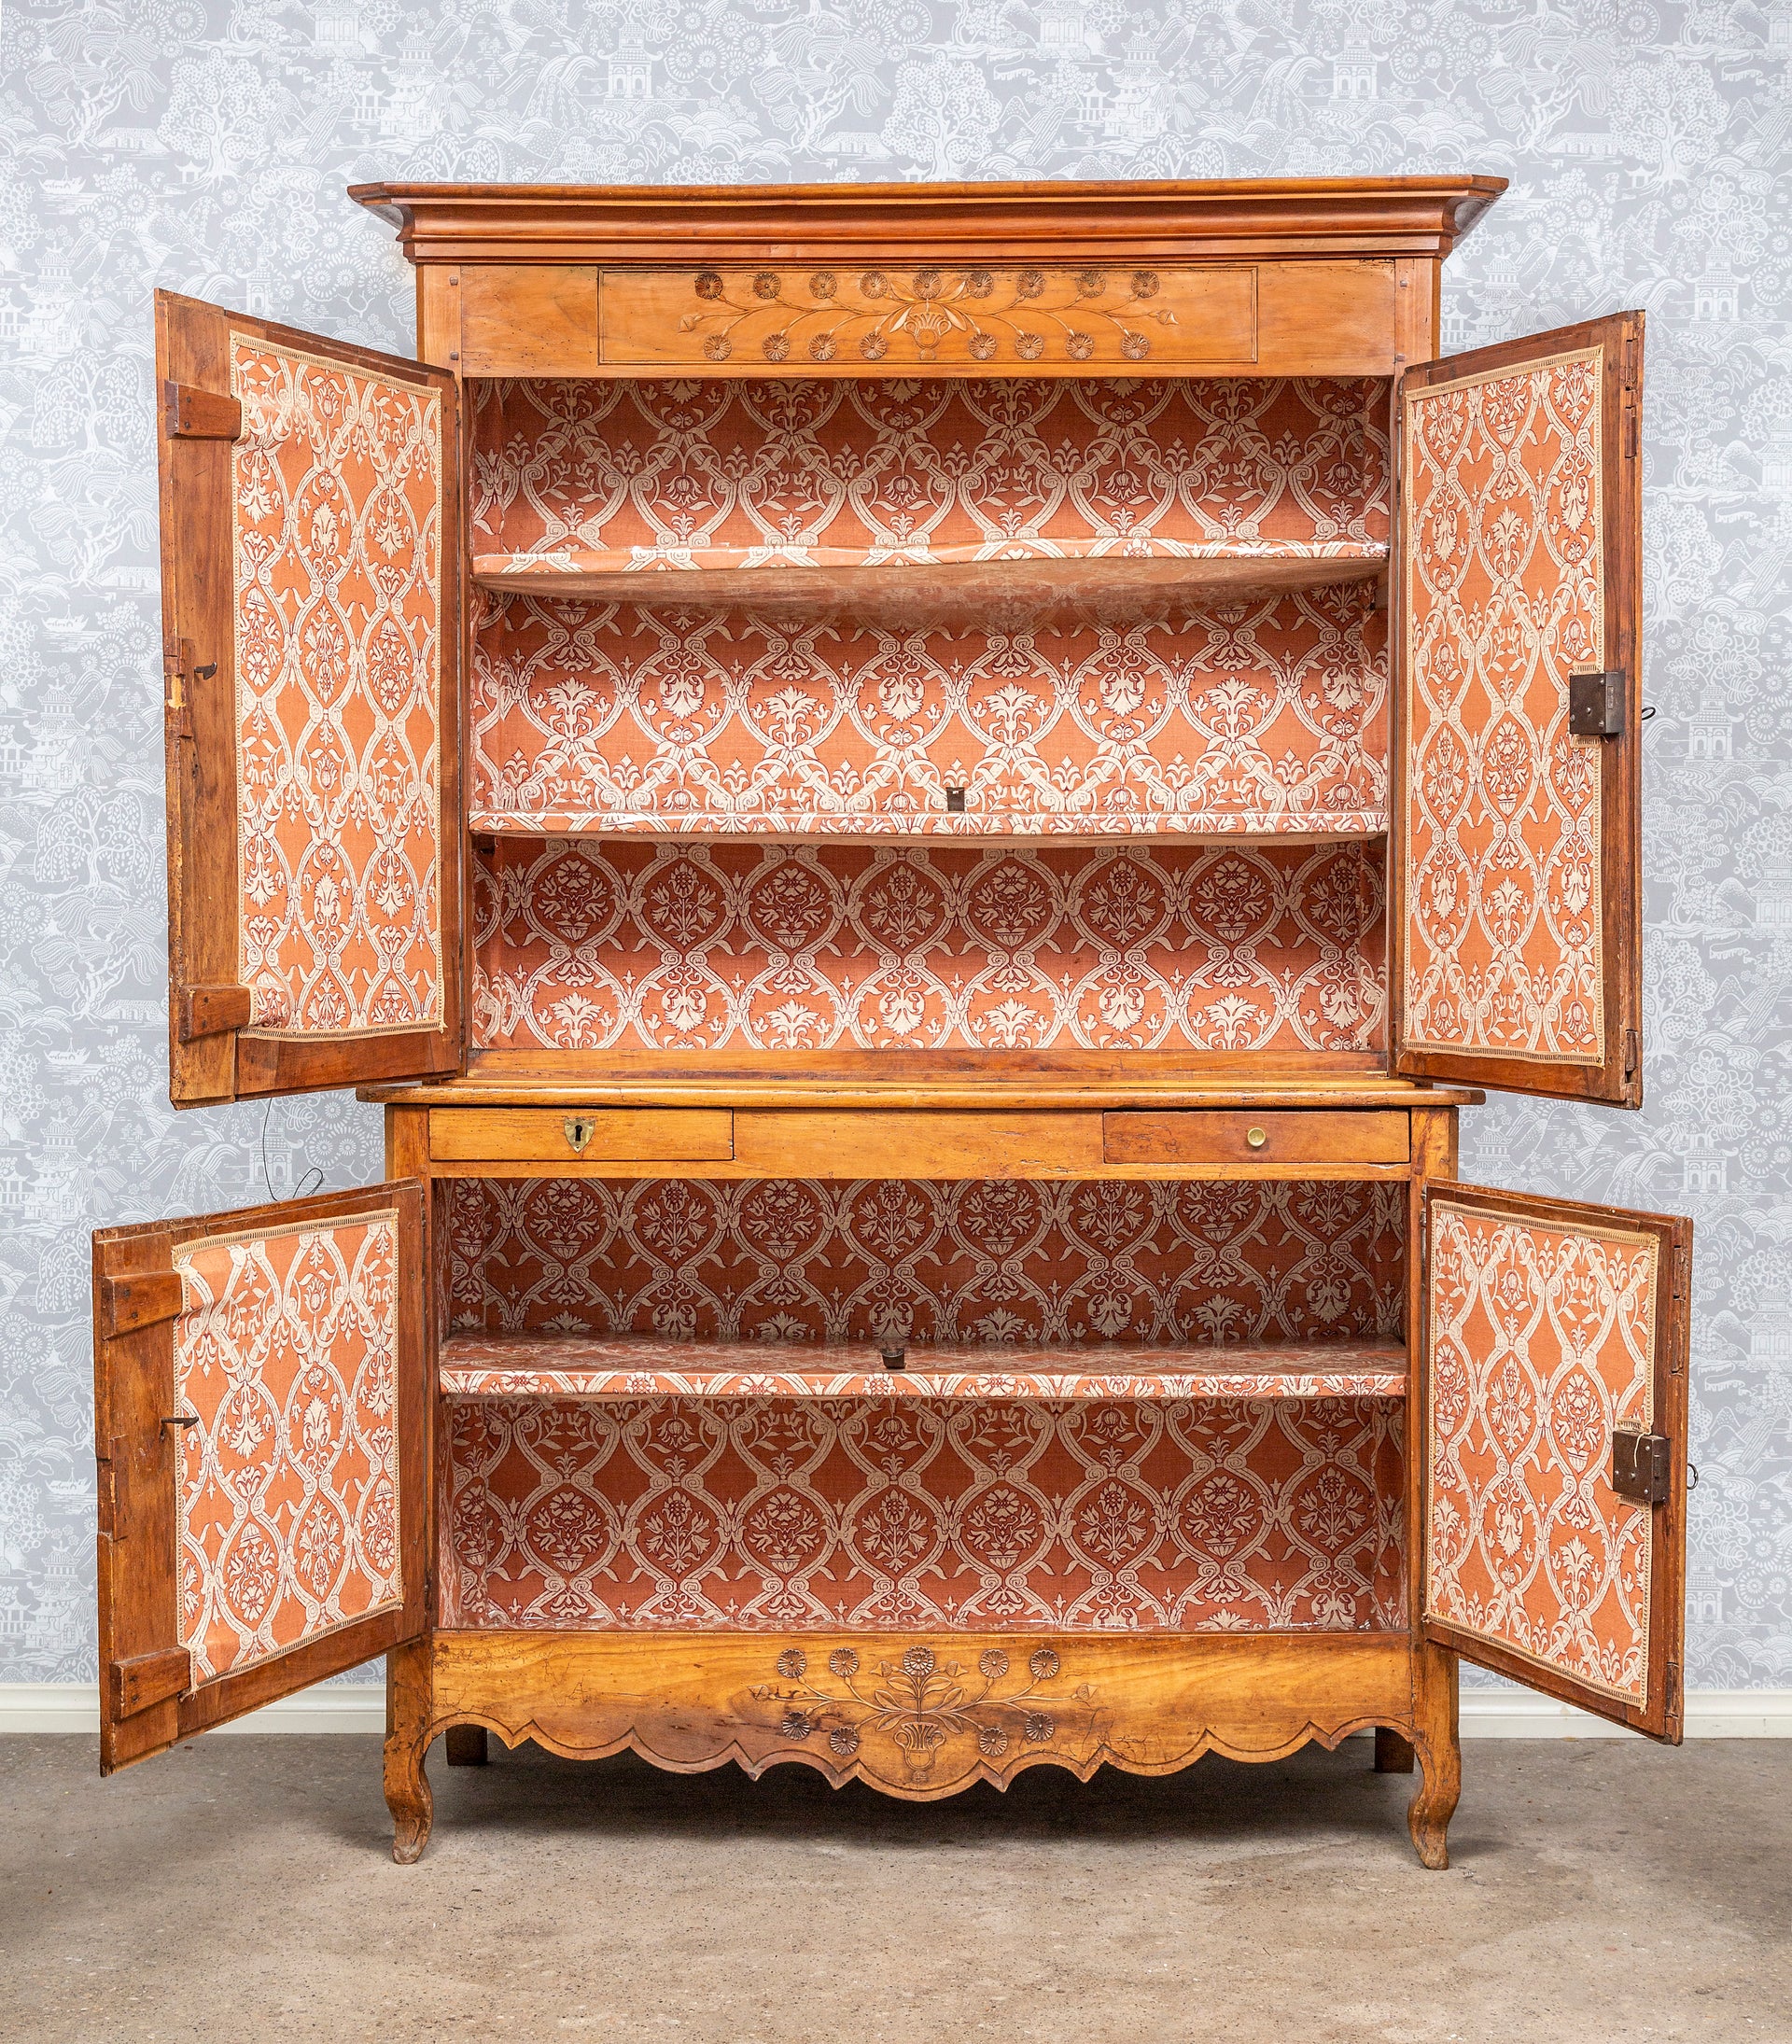 SOLD A finely carved cherrywood buffet a deux- corps, French circa 1800